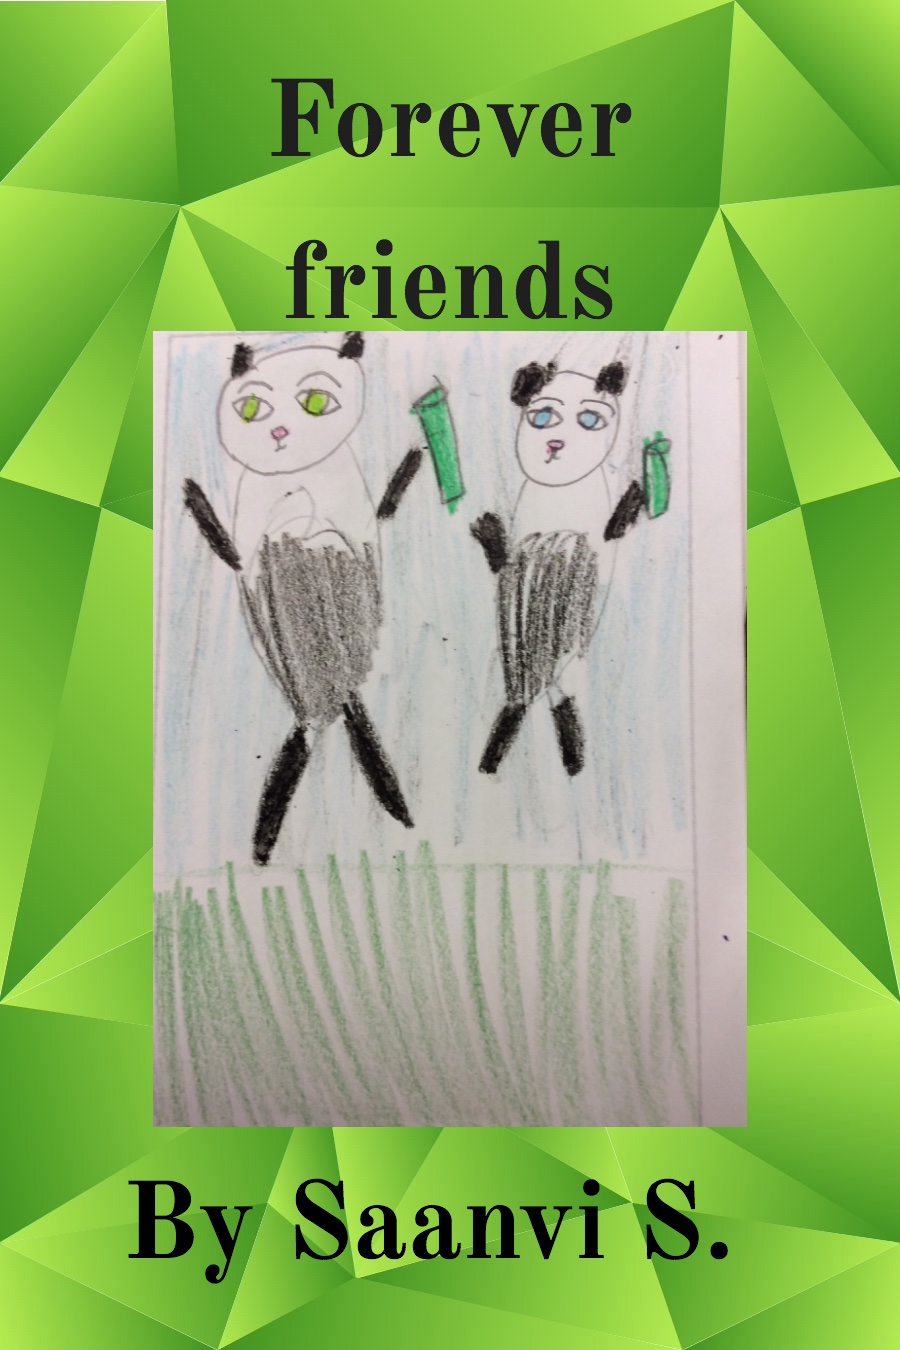 Forever Friends by Saanvi S